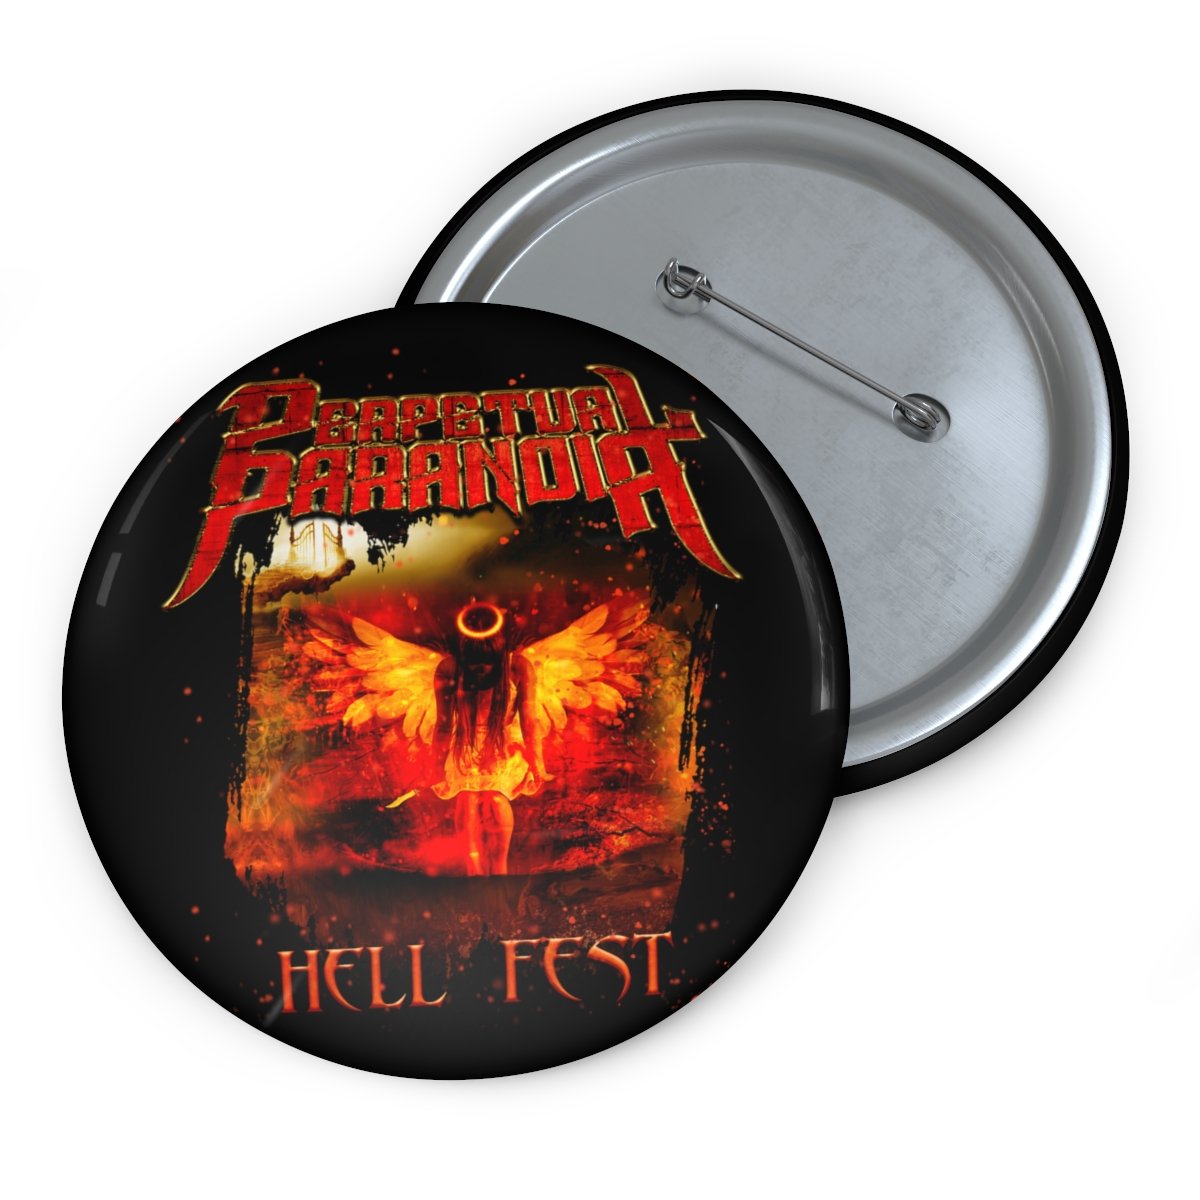 Perpetual Paranoia – Hell Fest Pin Buttons